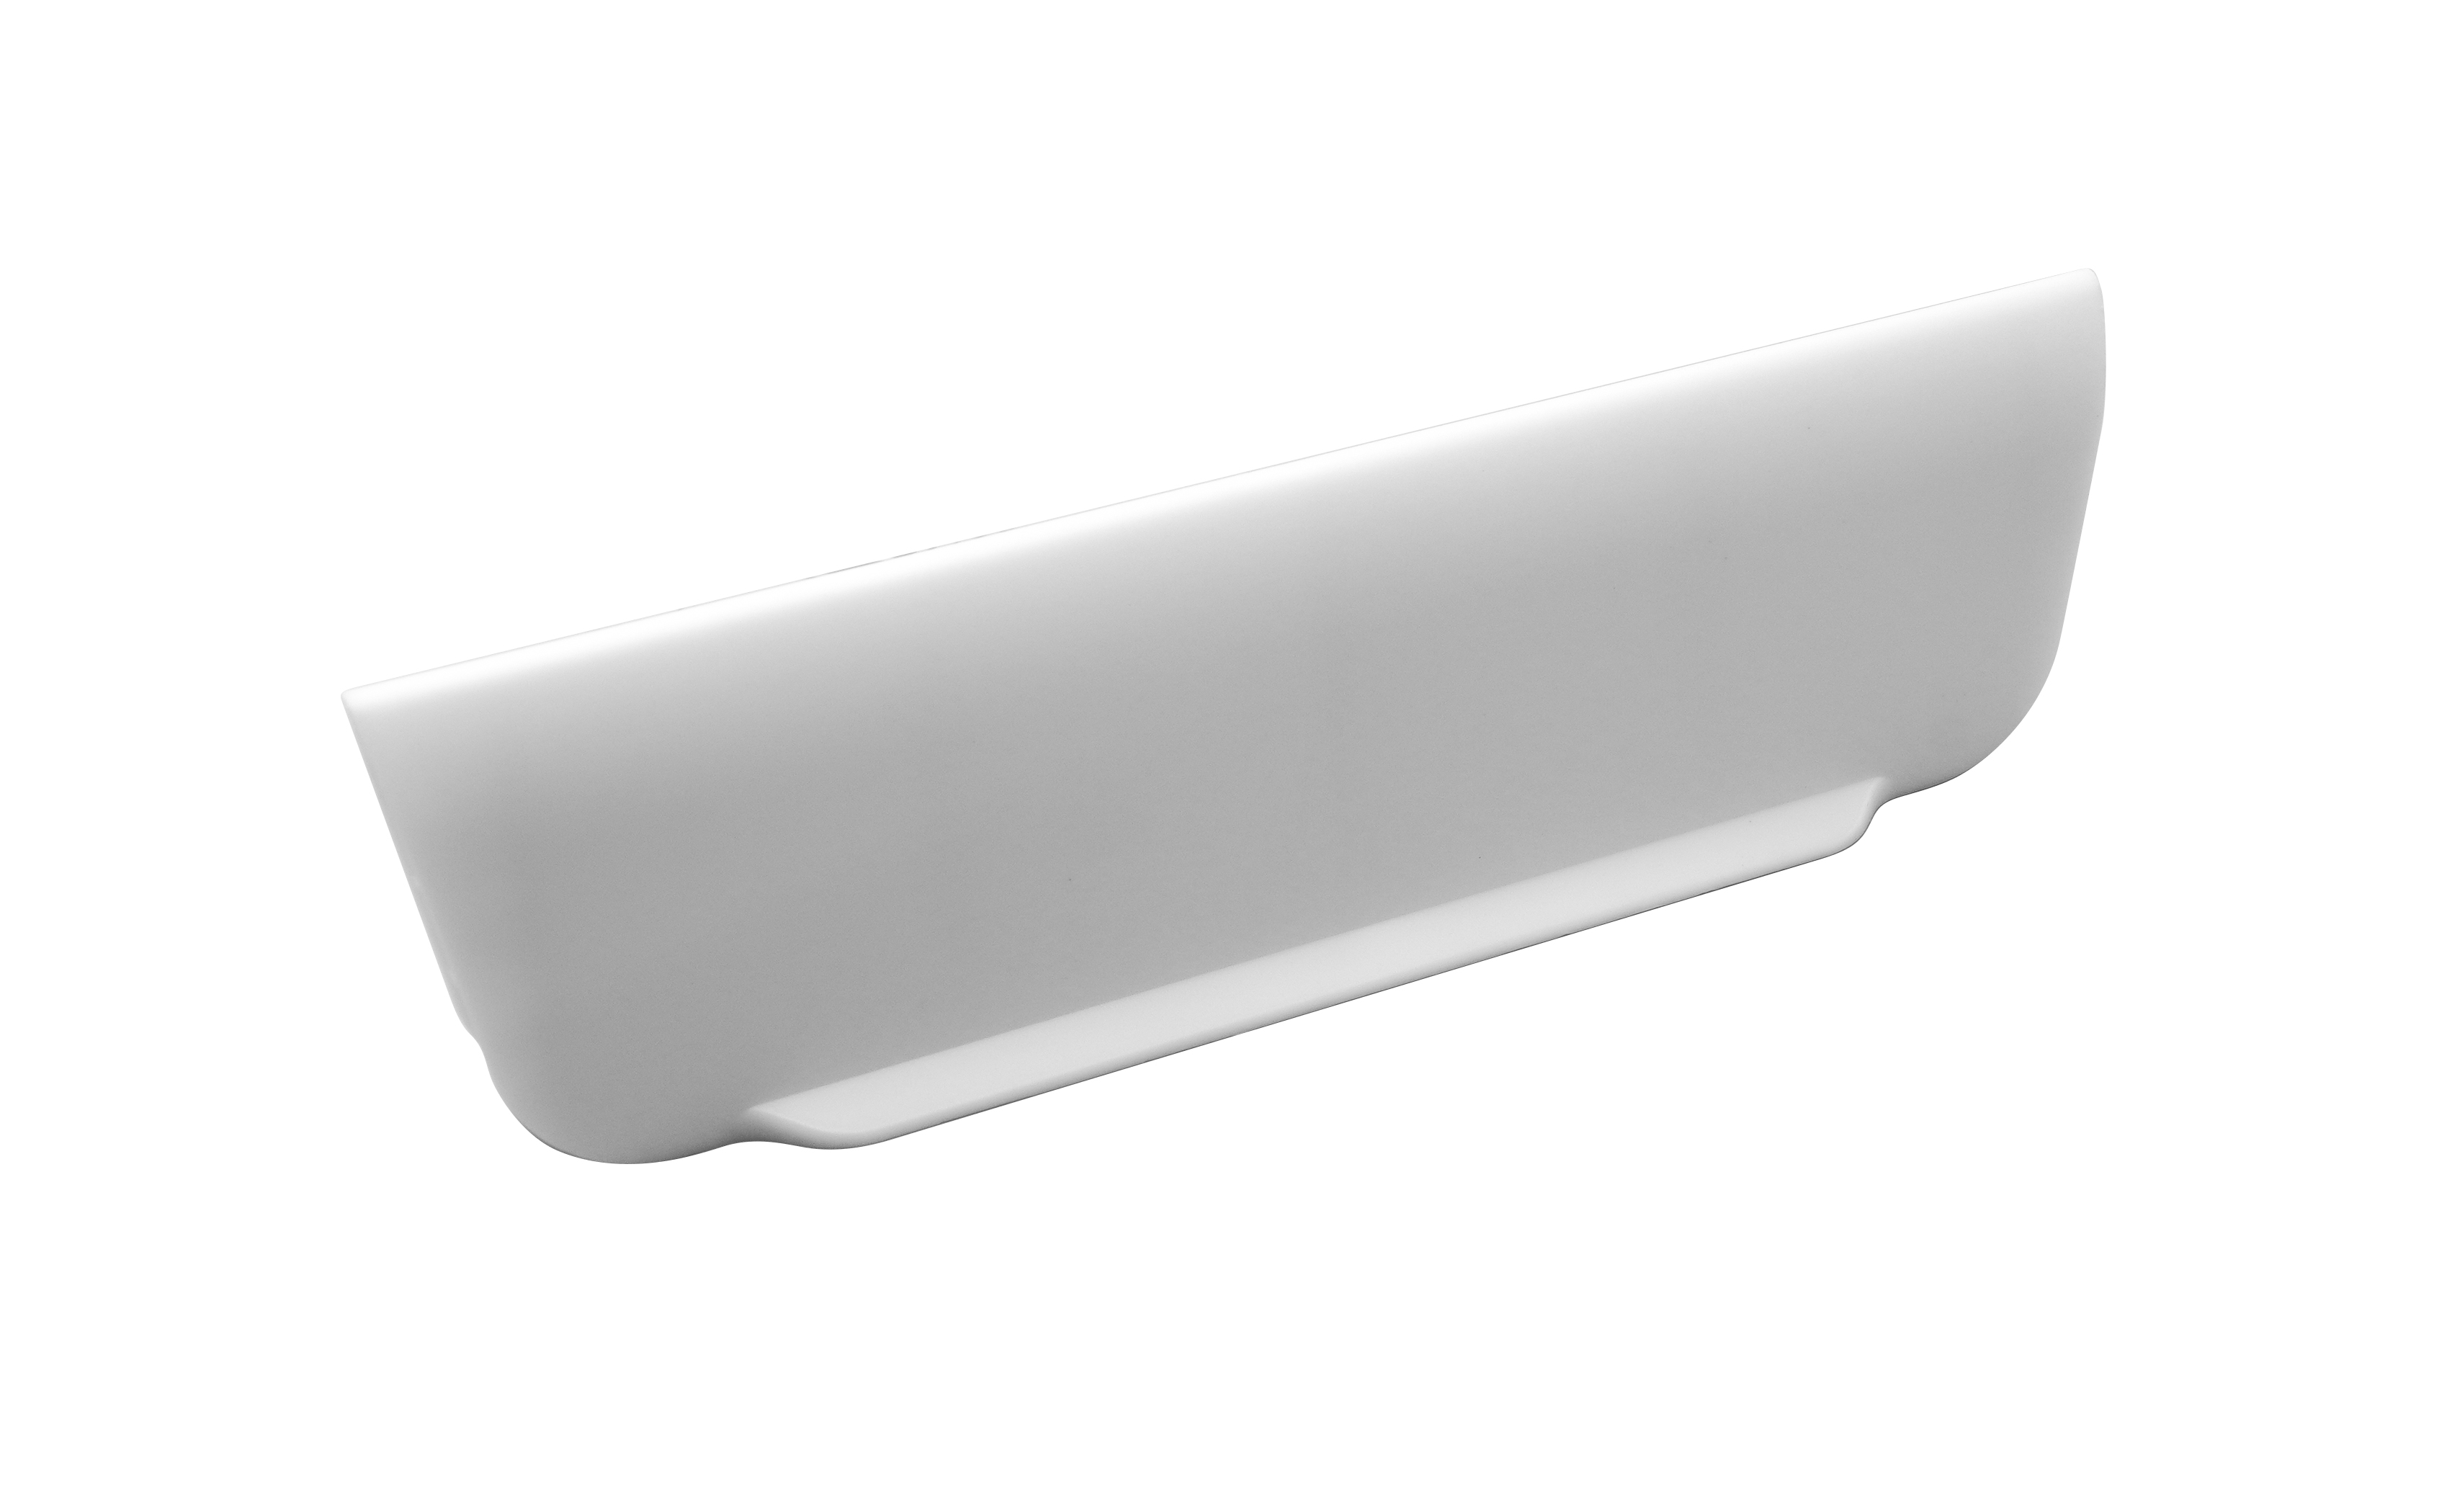 Cutlery tray divider_143x45_White